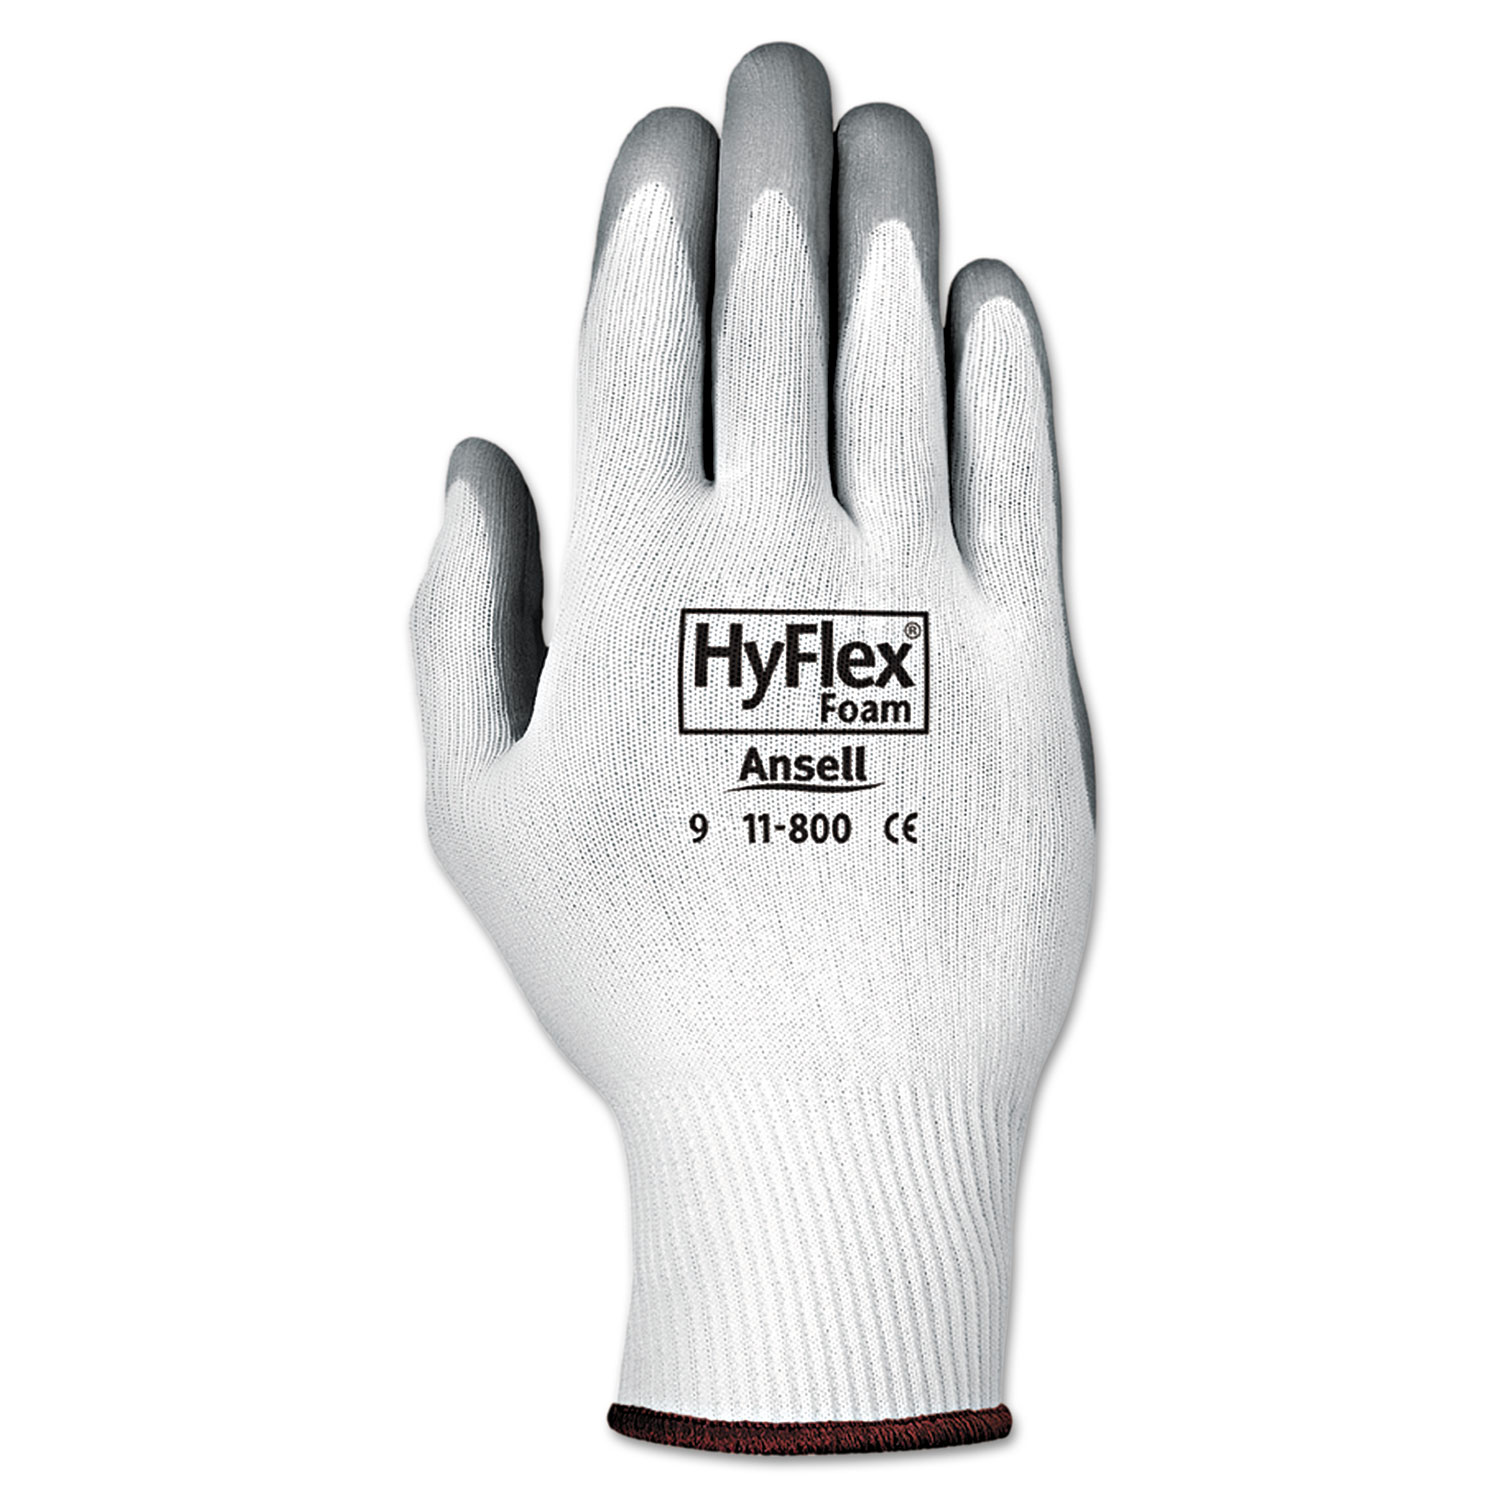  AnsellPro 103332 HyFlex Foam Gloves, White/Gray, Size 8, 12 Pairs (ANS118008) 